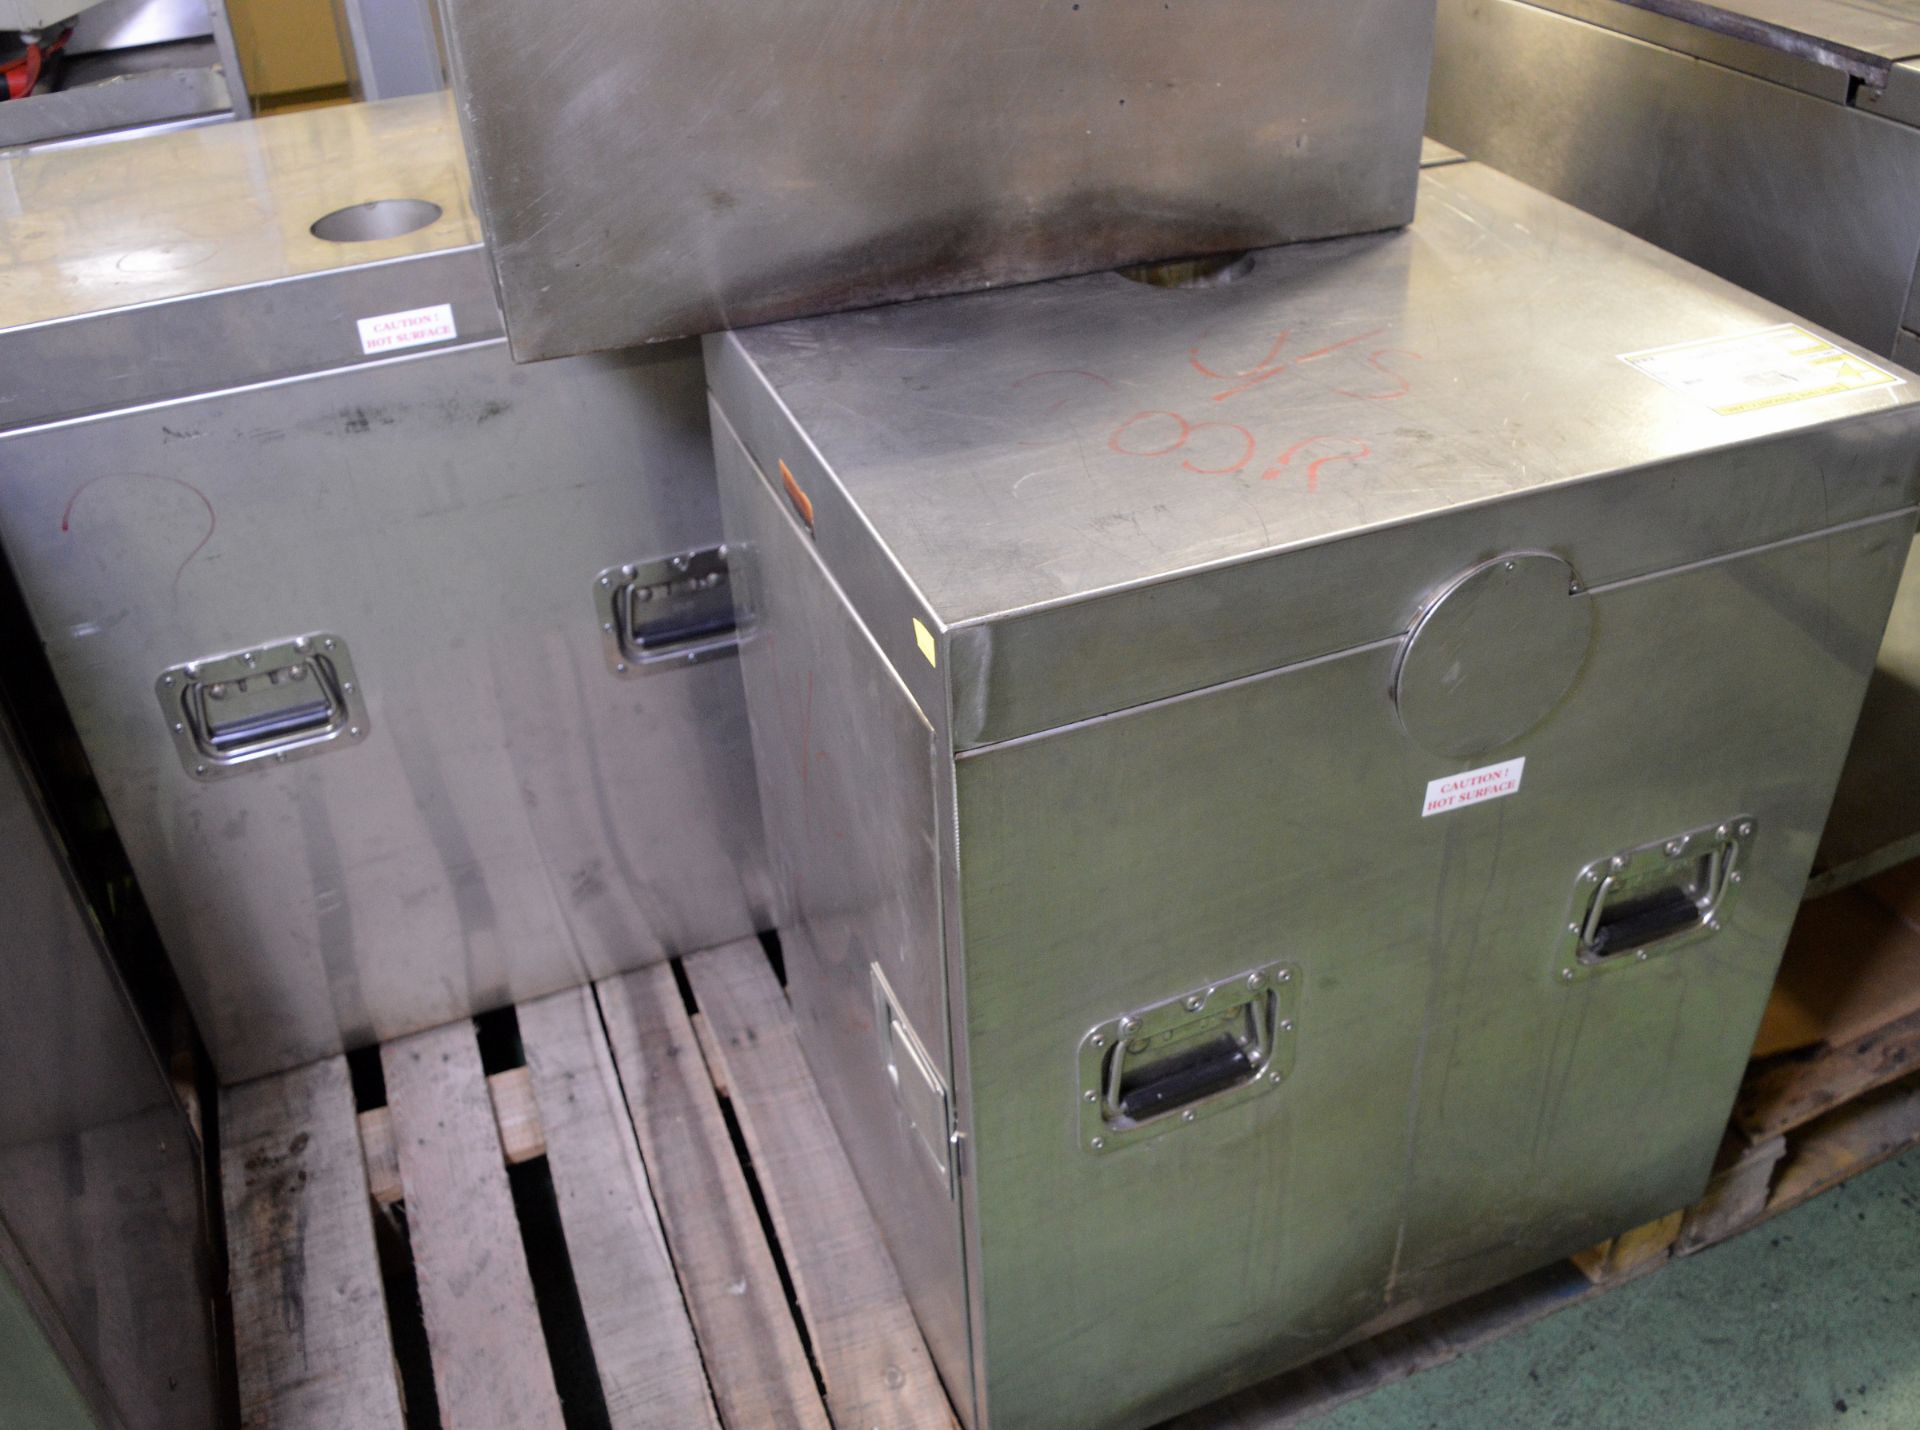 4x Karcher Baking and Roasting Ovens - W 650 x D 500 x H 740mm - Image 3 of 4